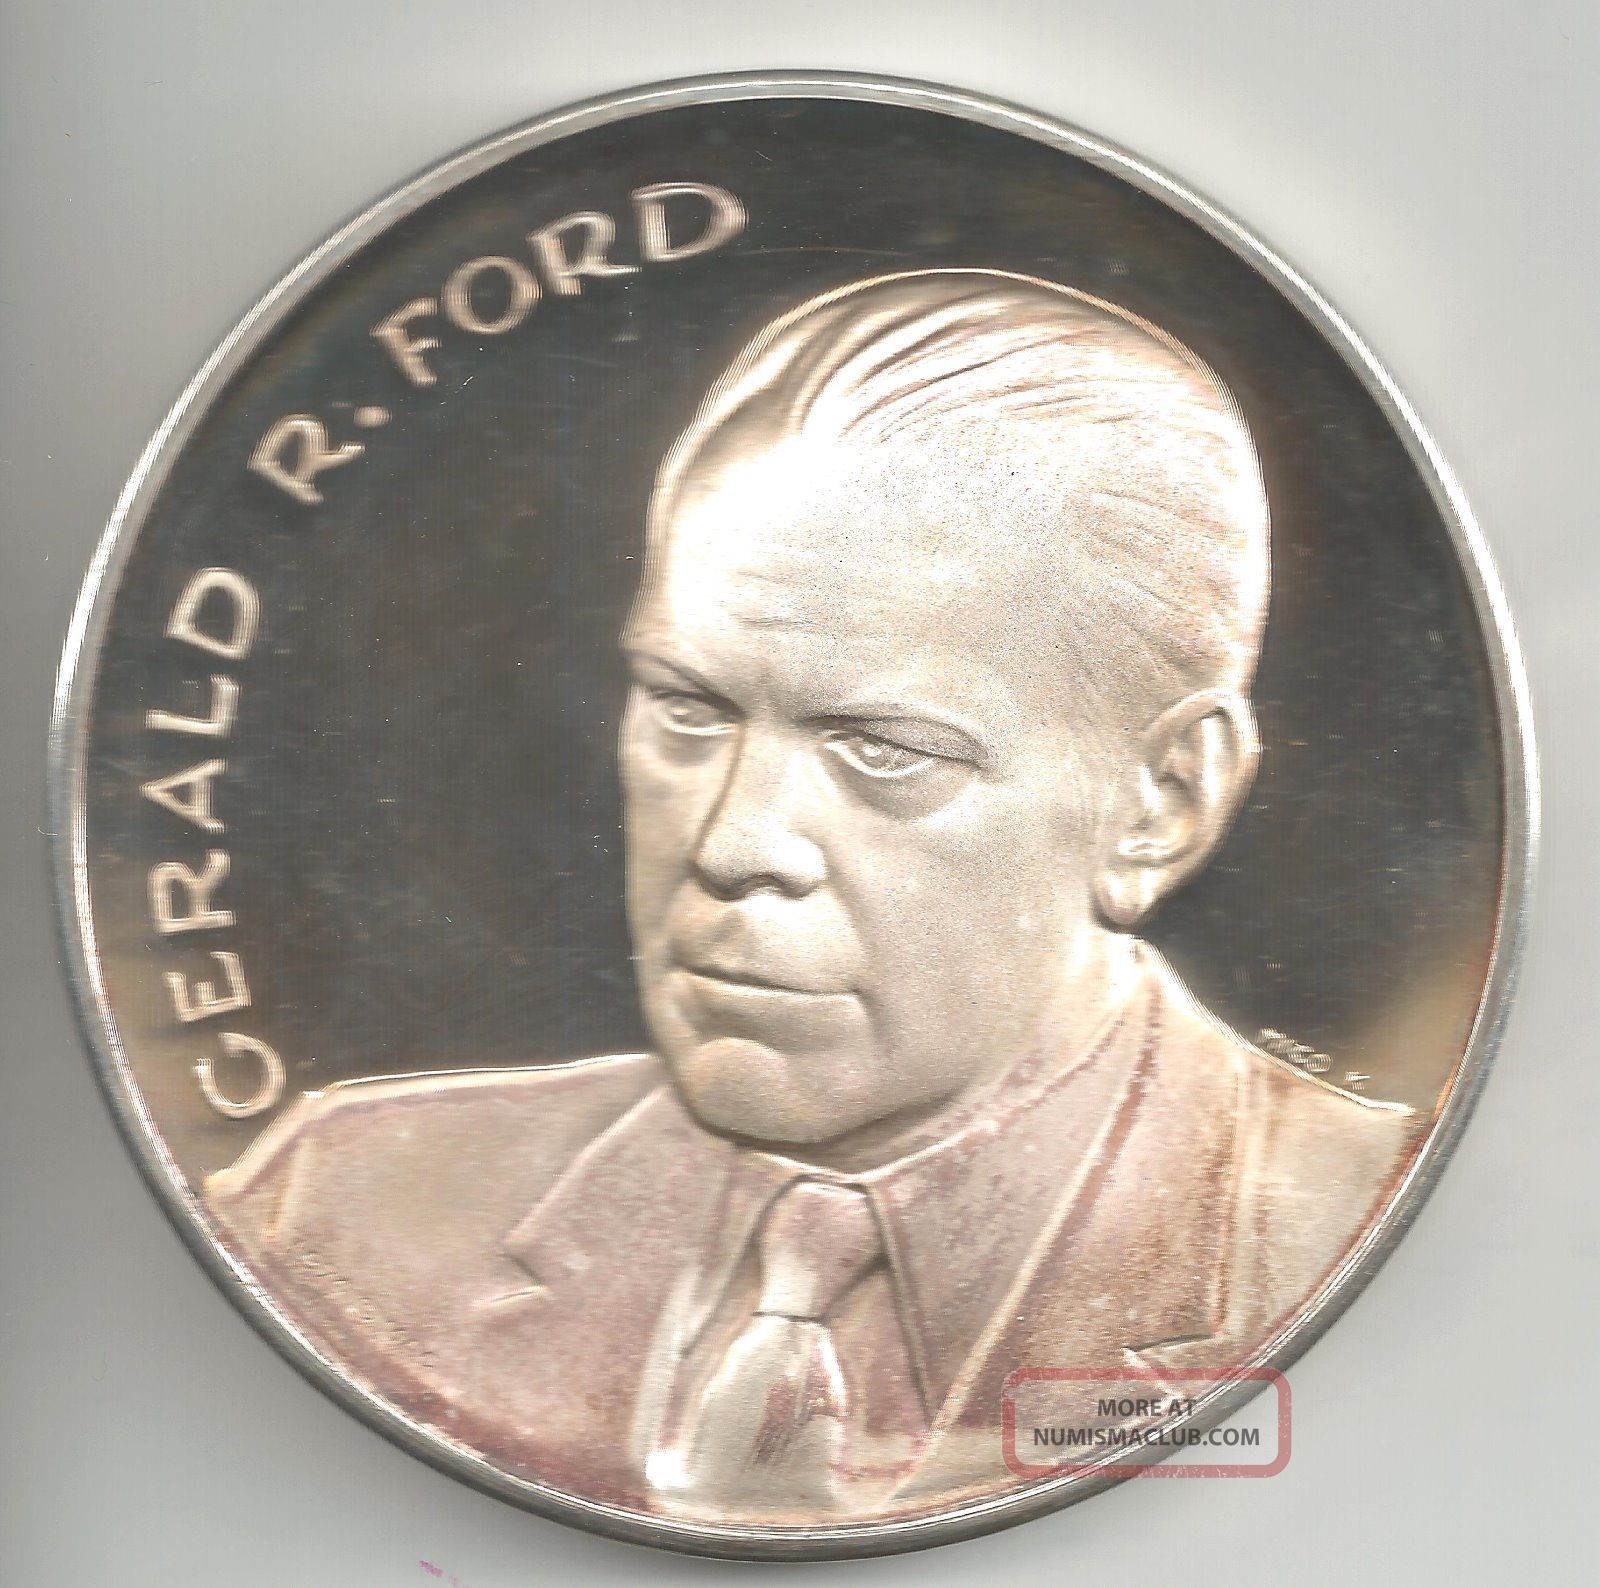 Gerald ford congressional medal